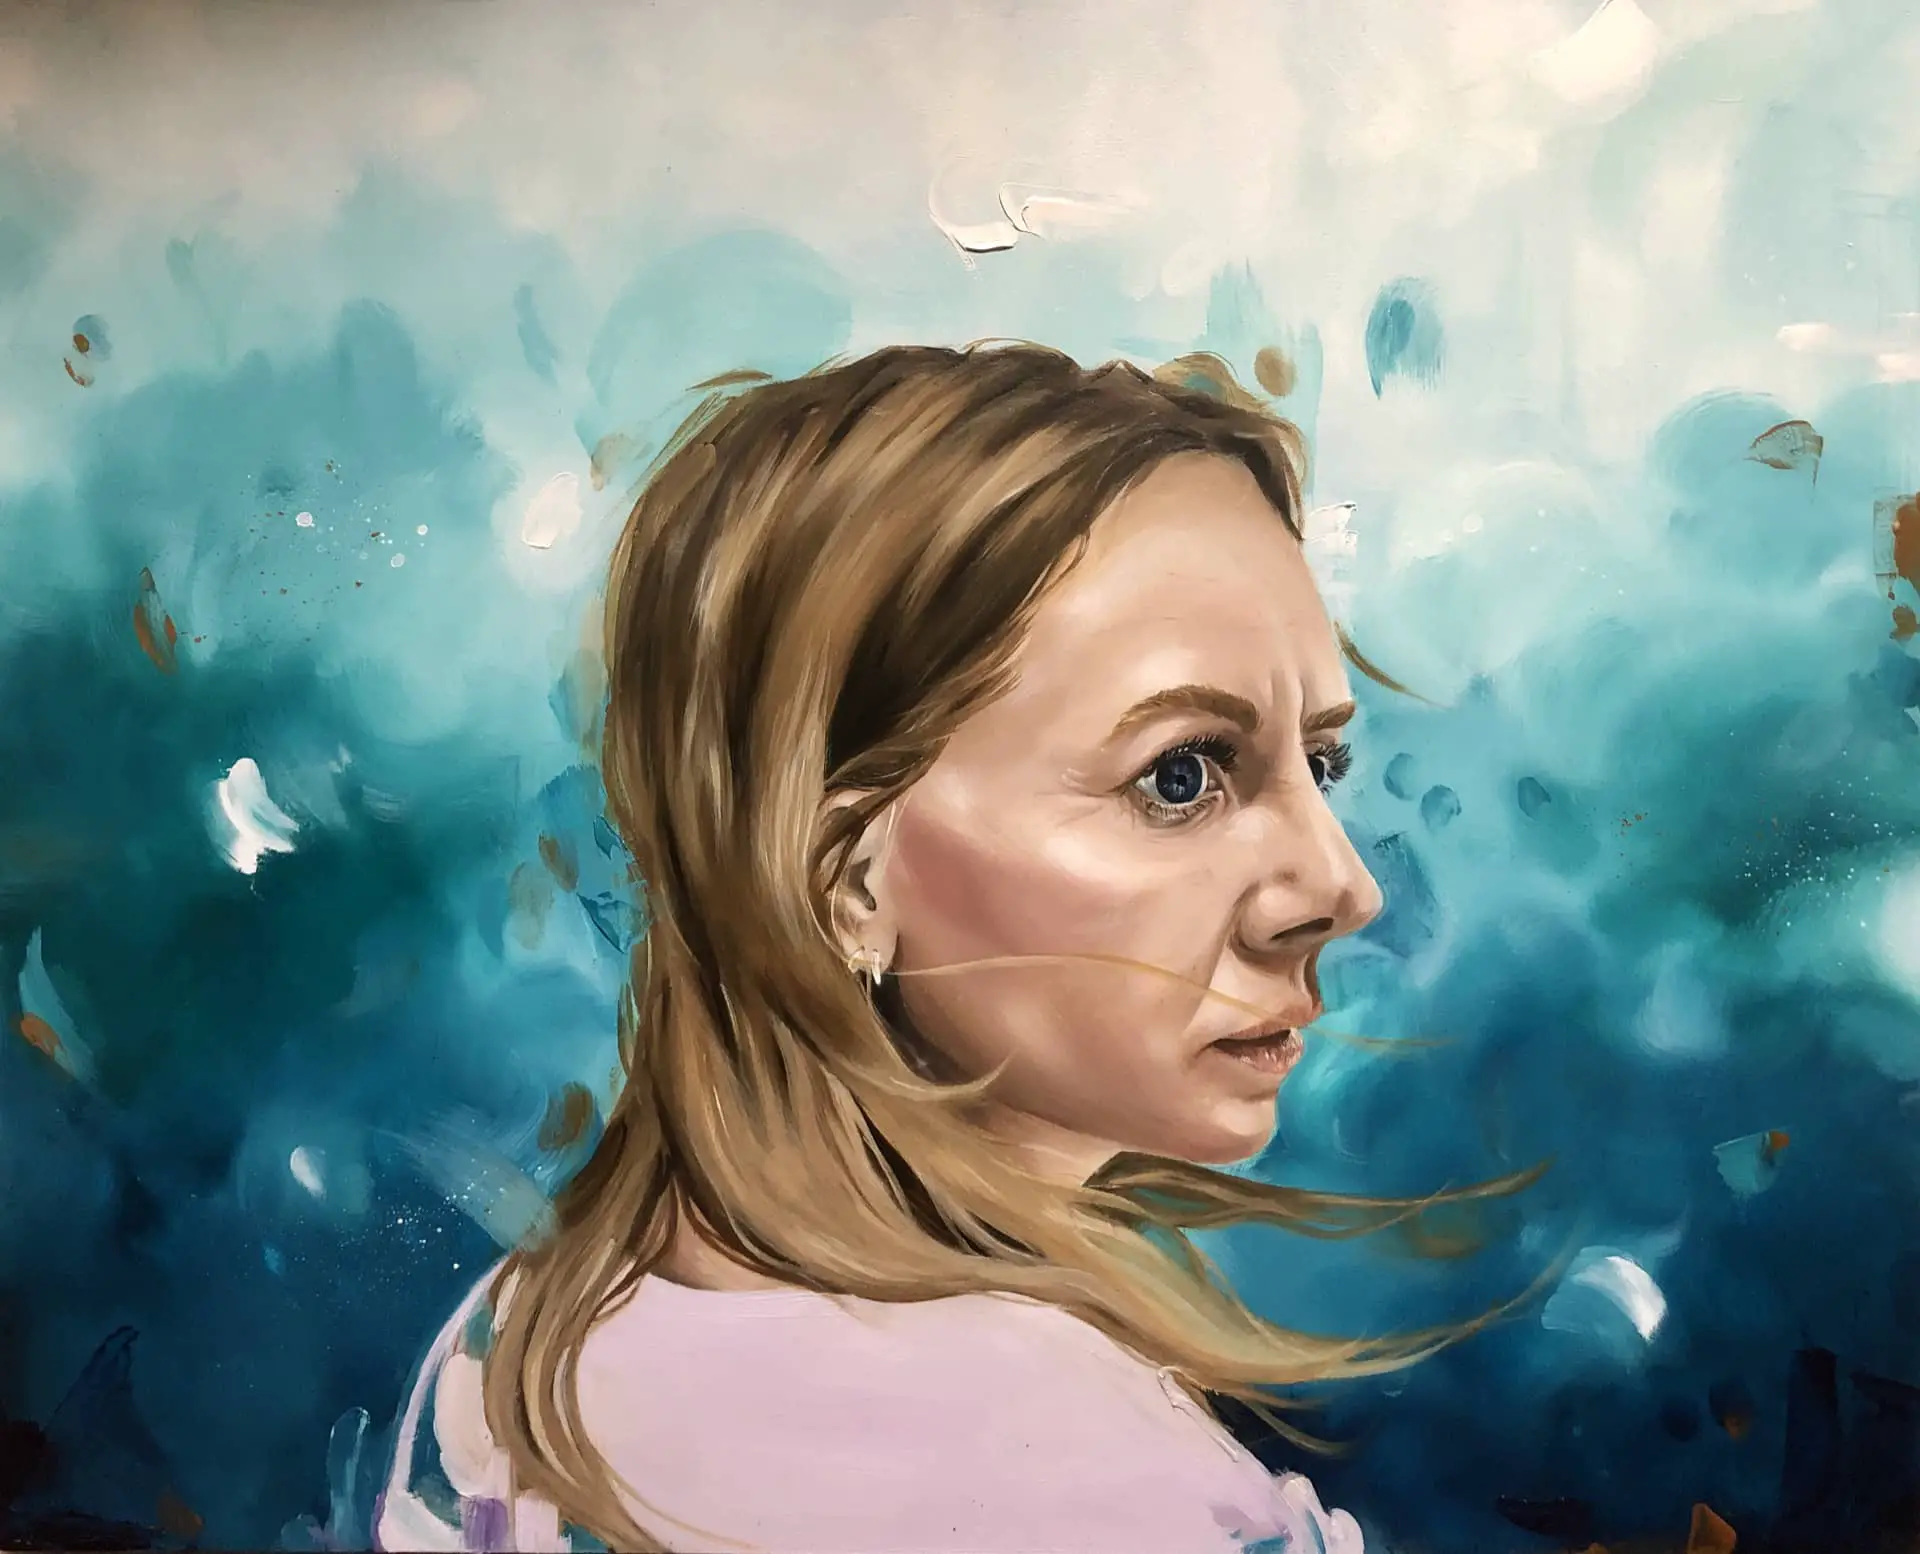 Painting of a woman looking concerned, with blue background by Chloe Anstey